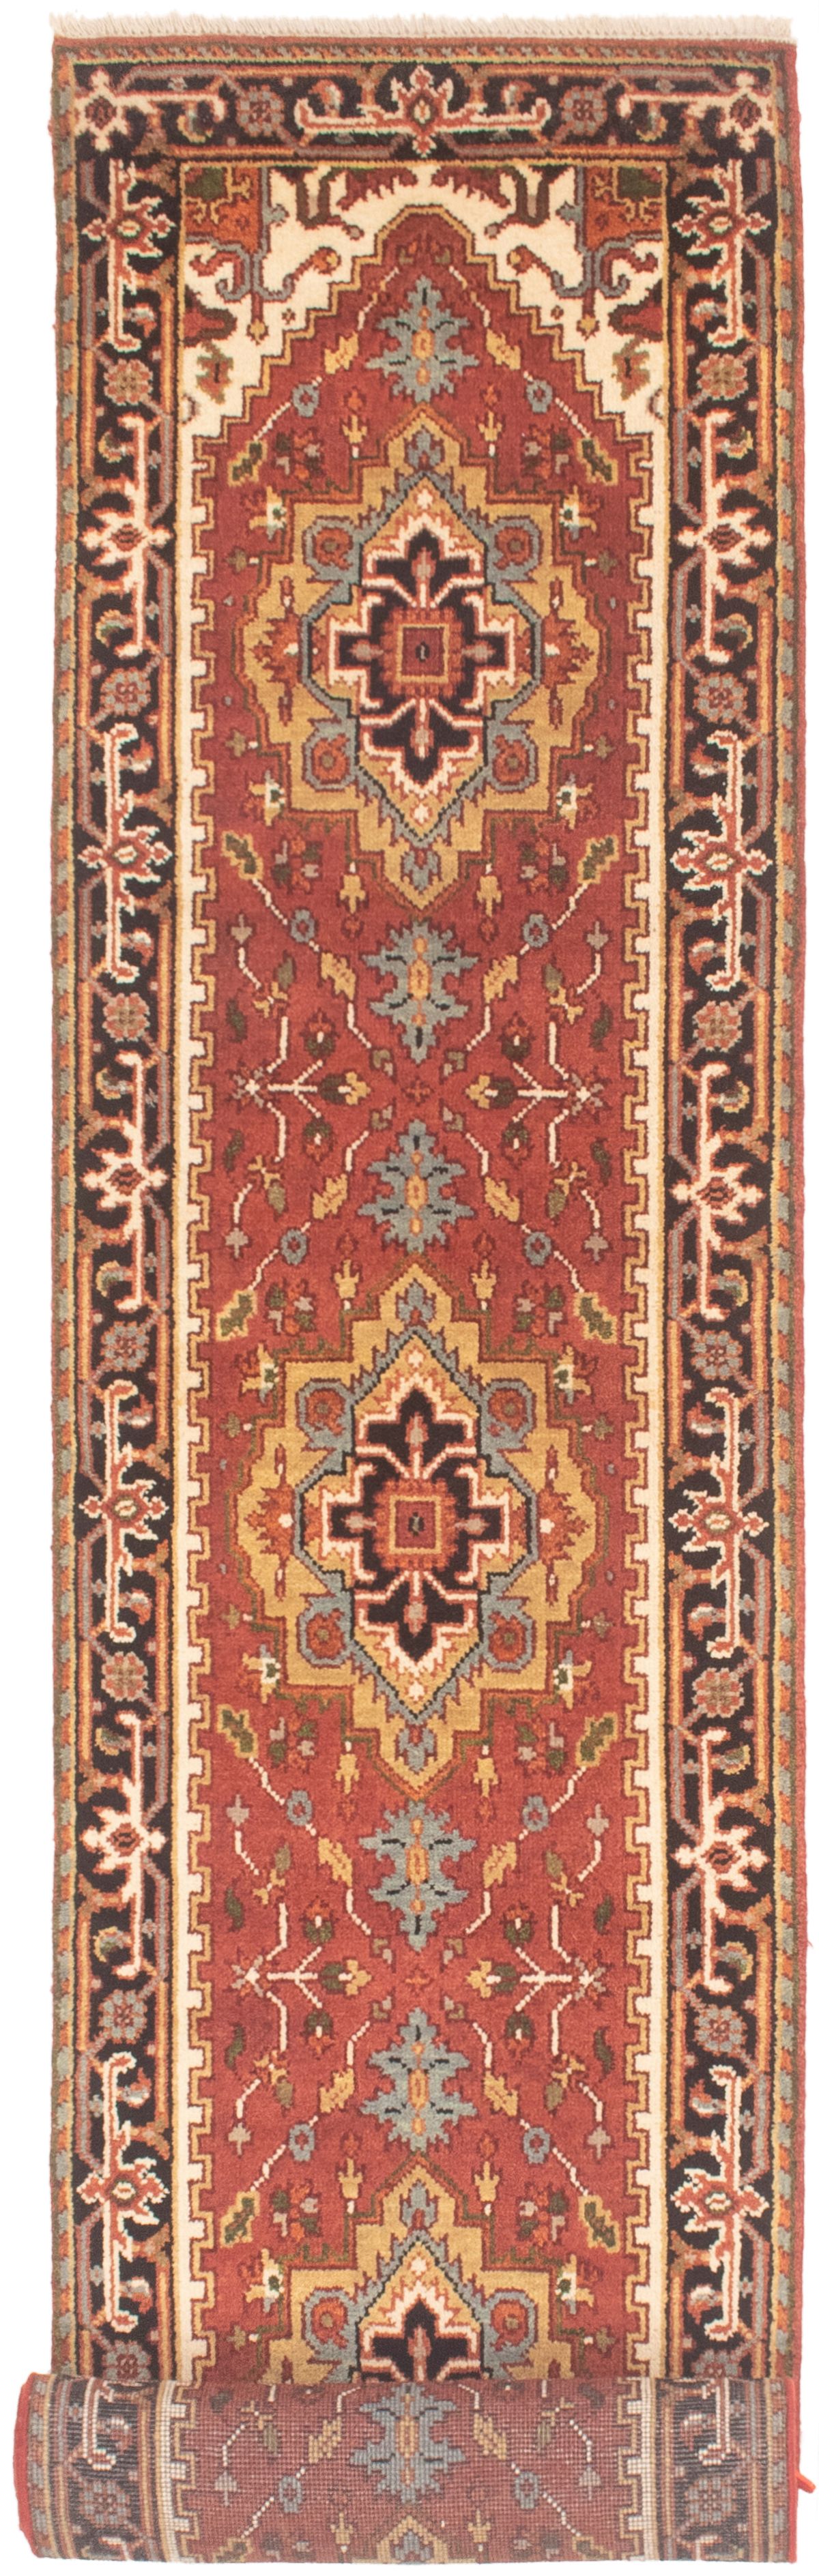 Hand-knotted Serapi Heritage Copper Wool Rug 2'6" x 16'3" Size: 2'6" x 16'3"  